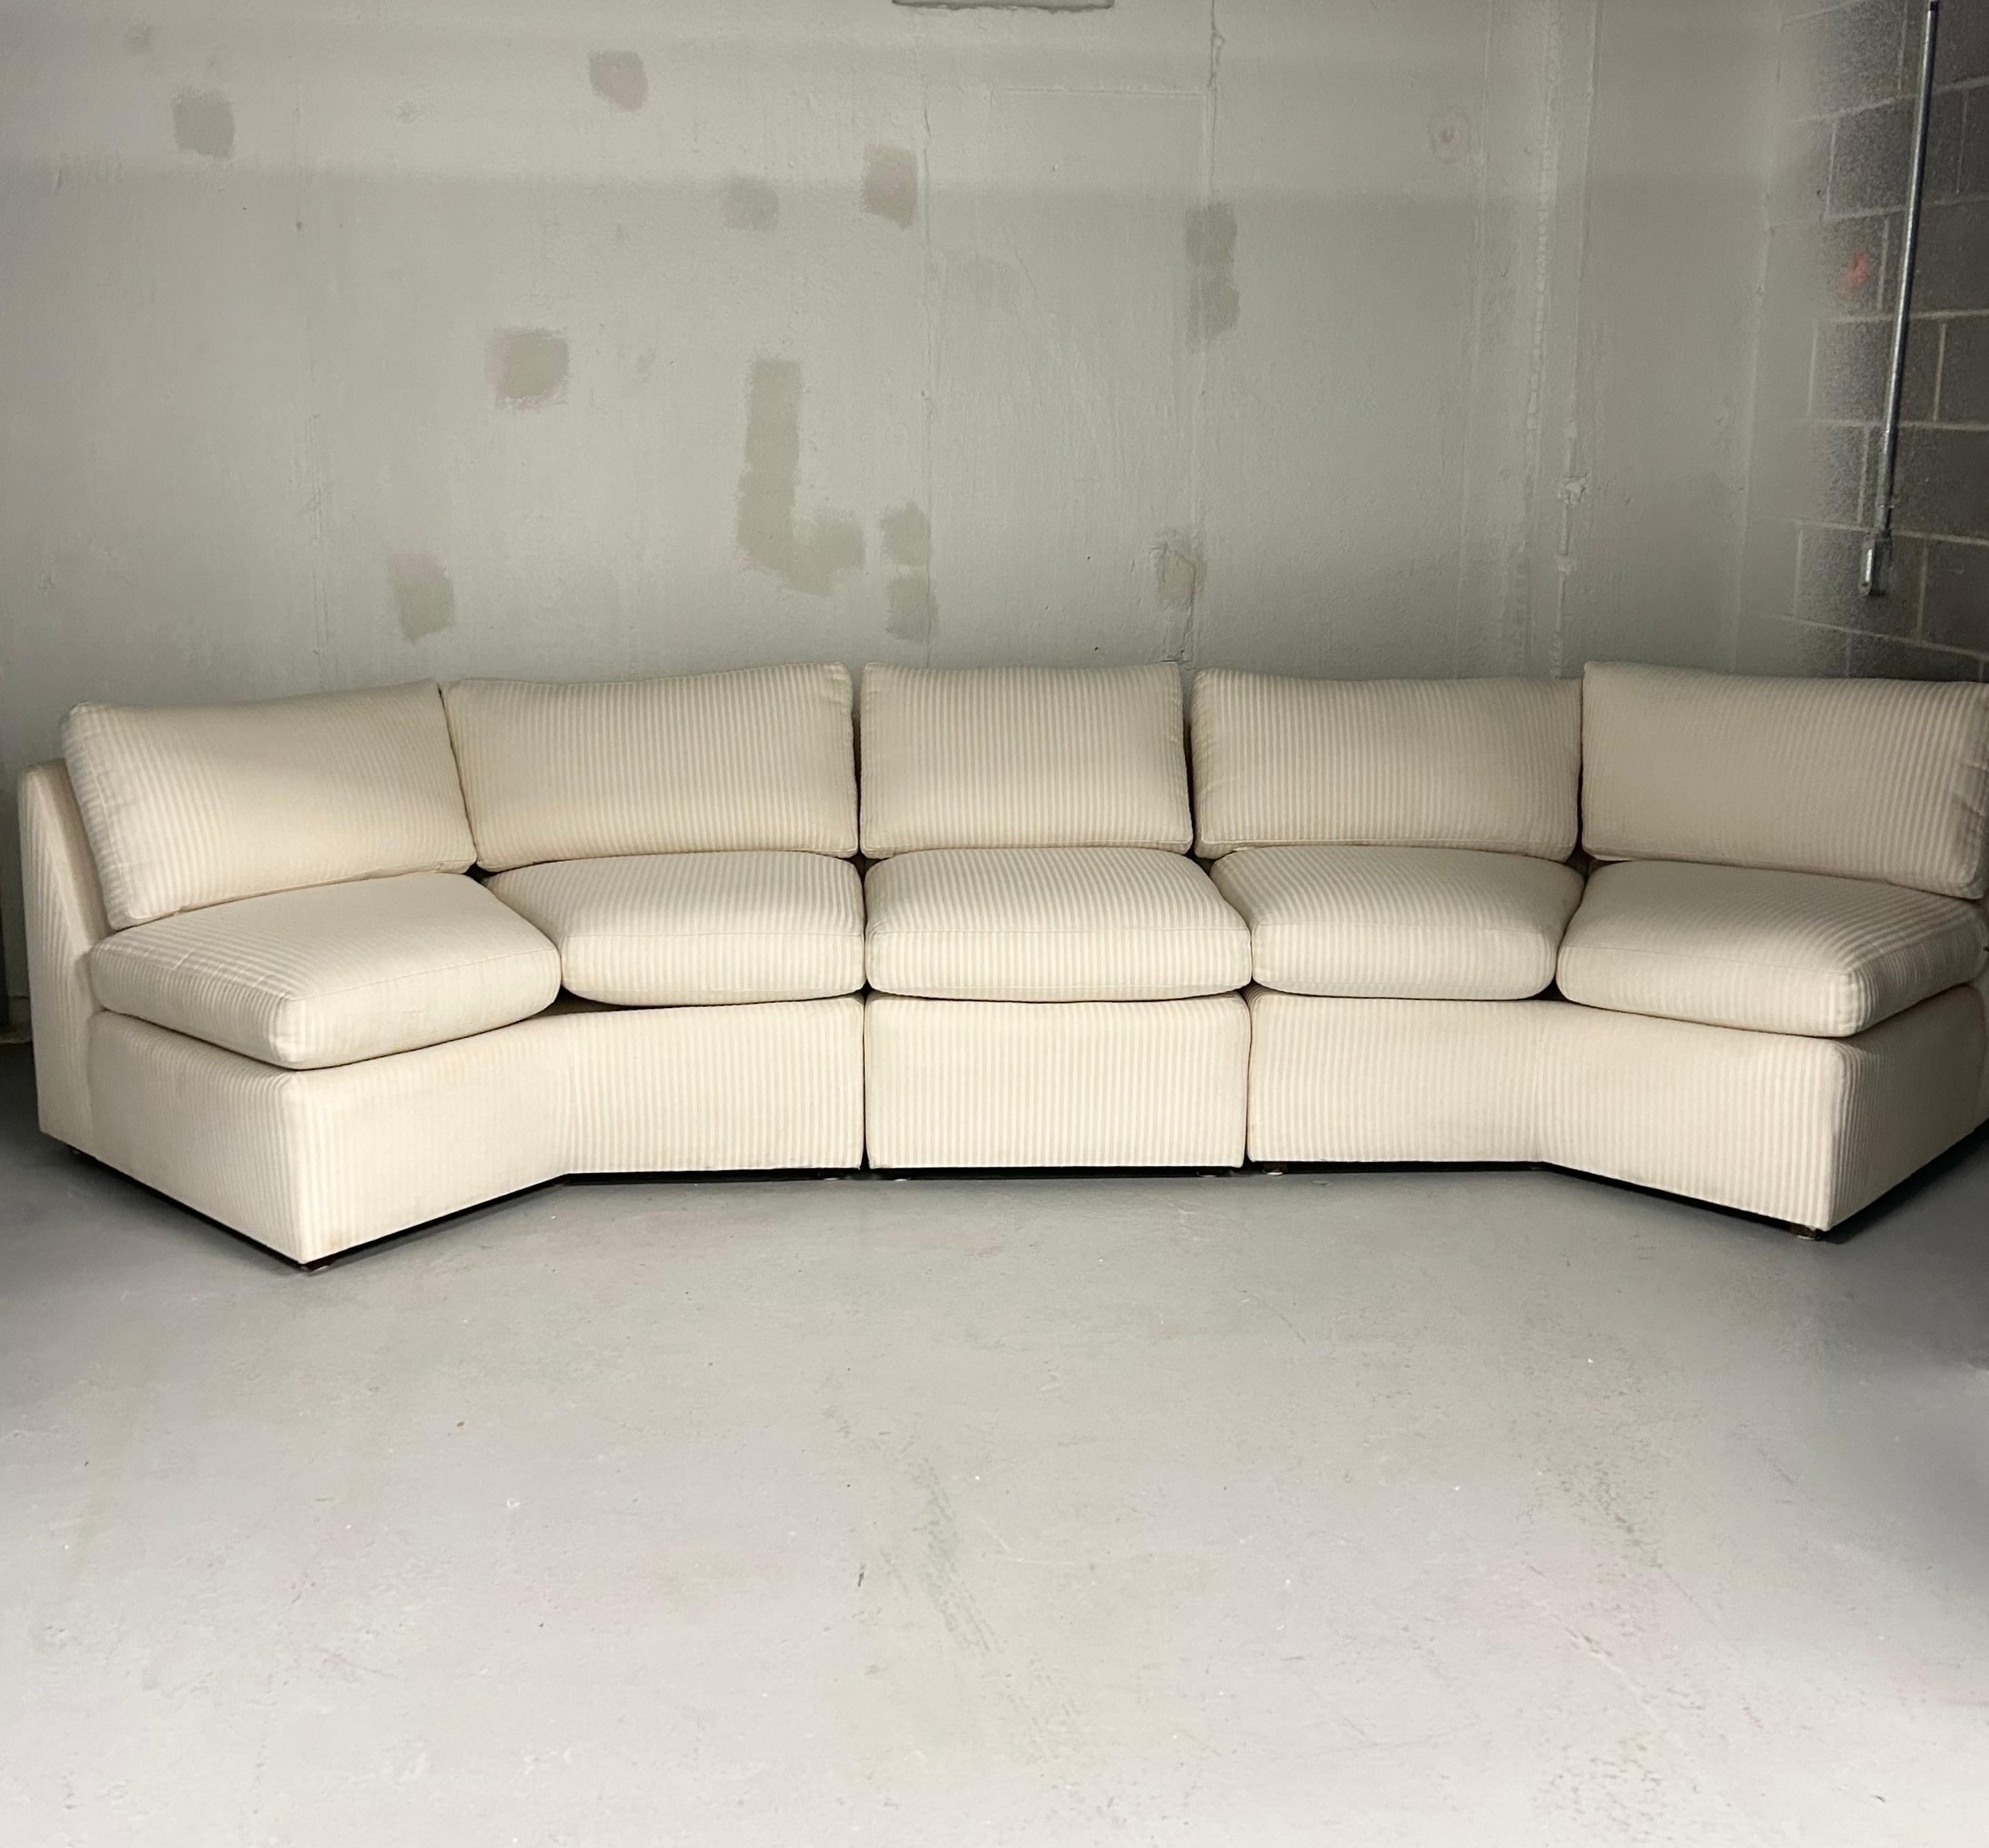 Upholstery Vintage Sectional Sofa